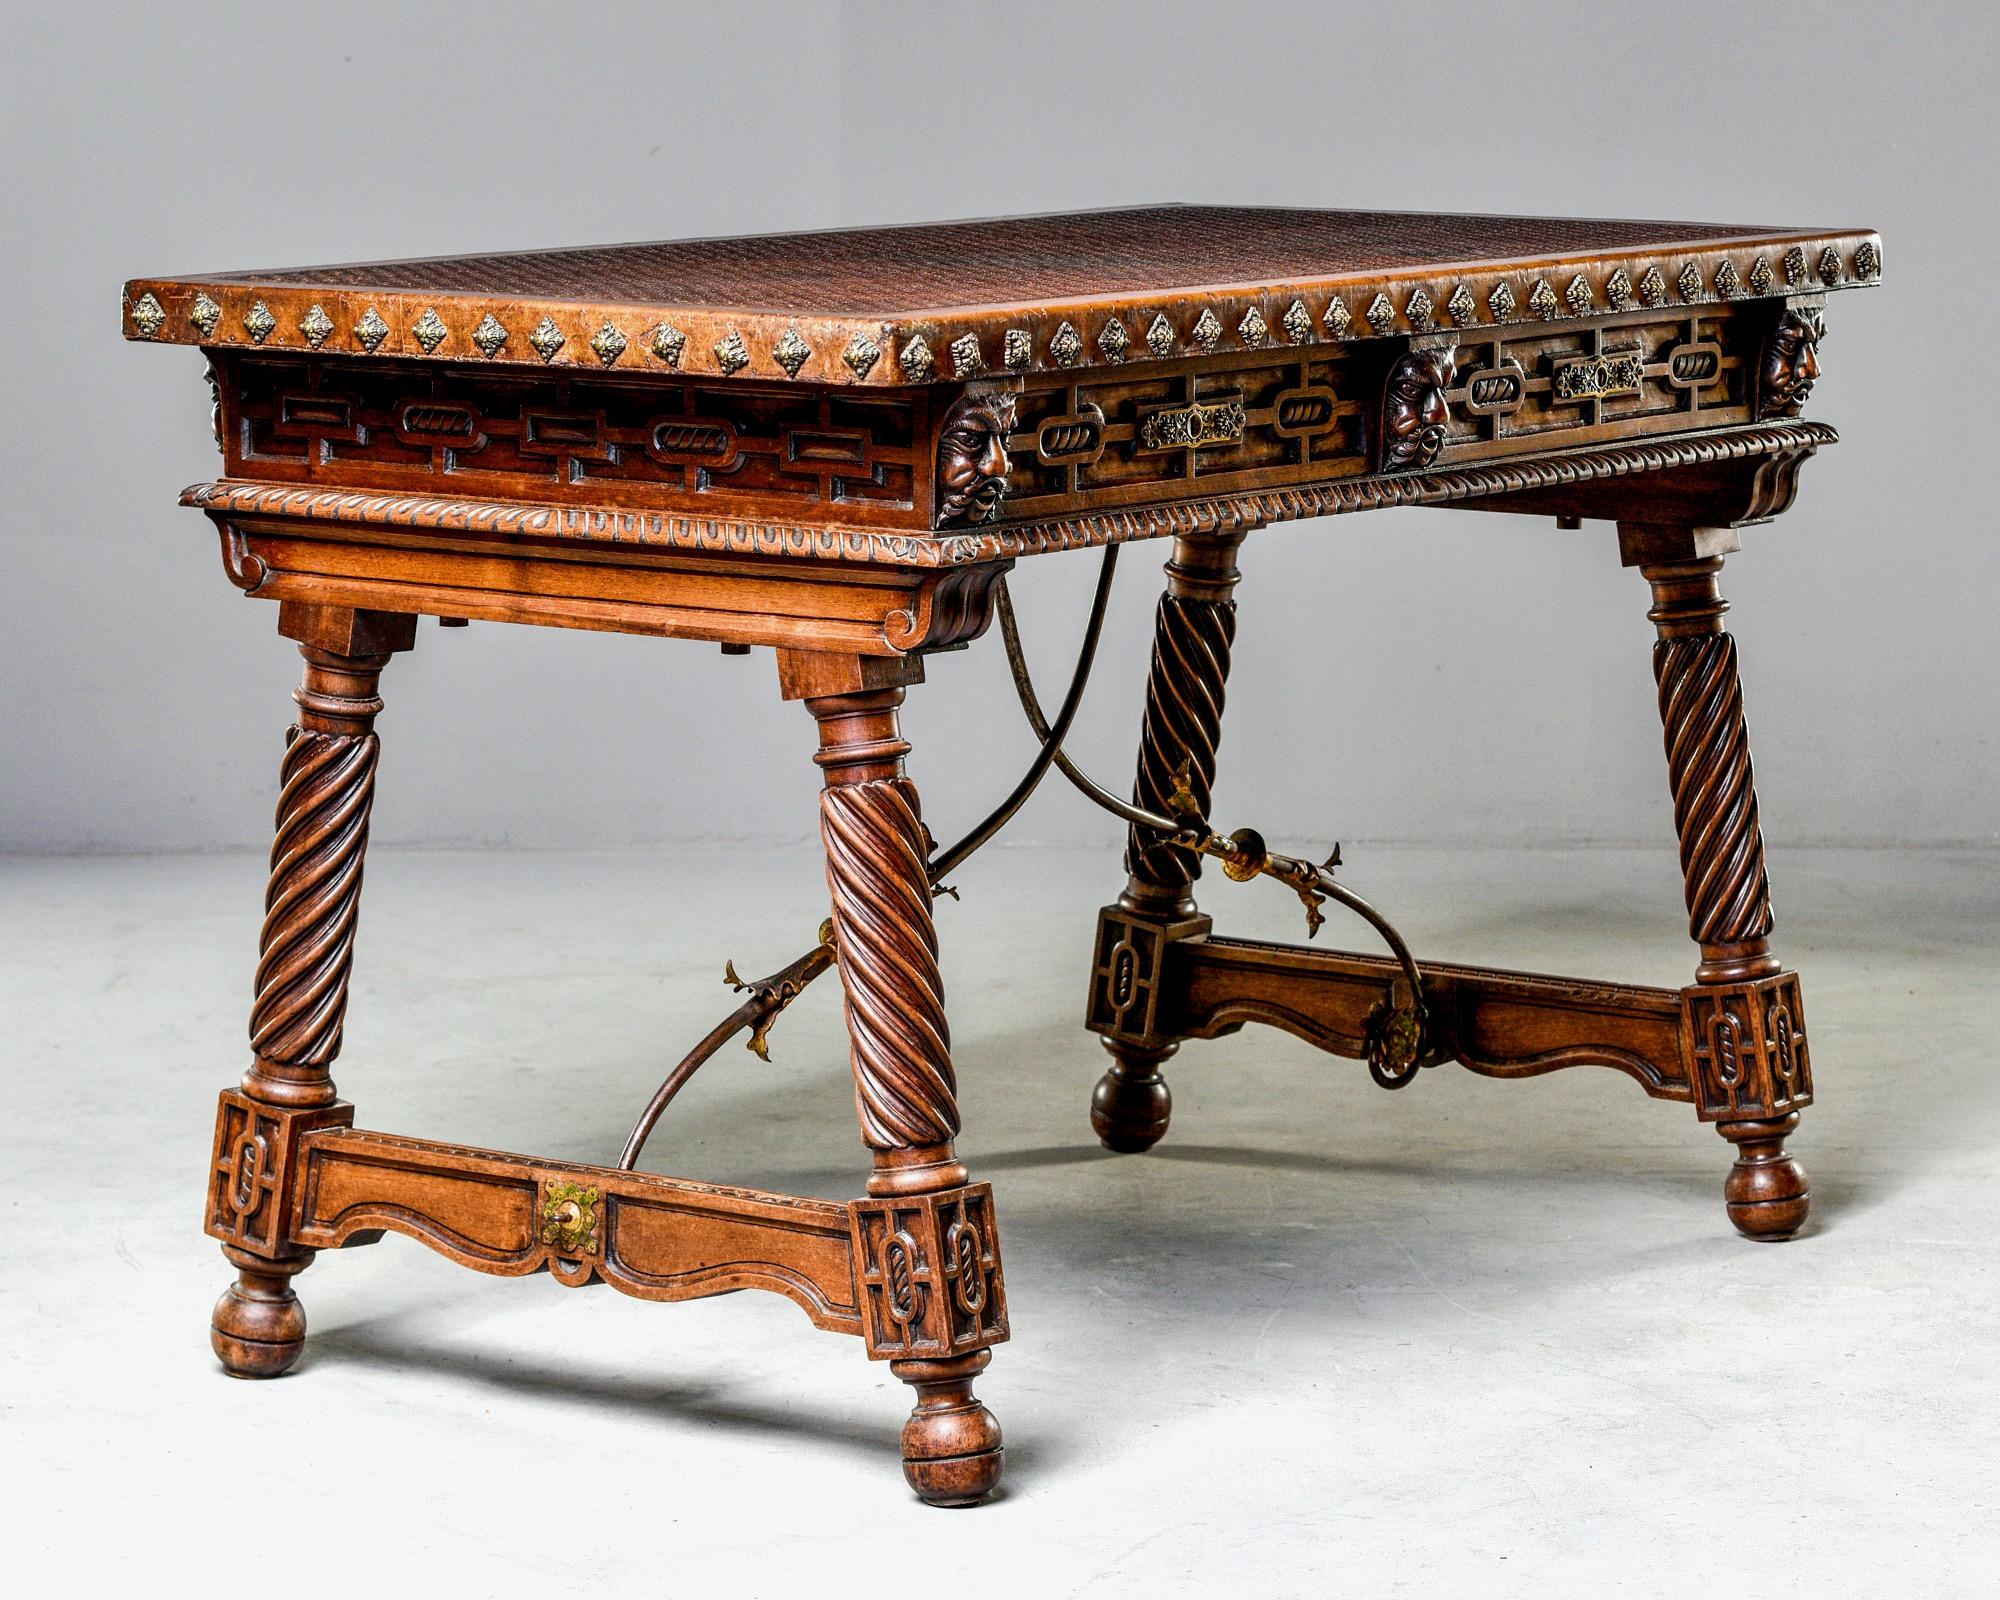 Spanish library or writing table features a new, embossed leather top, decorative brass nail head studs on the desktop edges, carved faces on the apron and two functional locking drawers, circa 1870s. Legs and supports all have carved details and